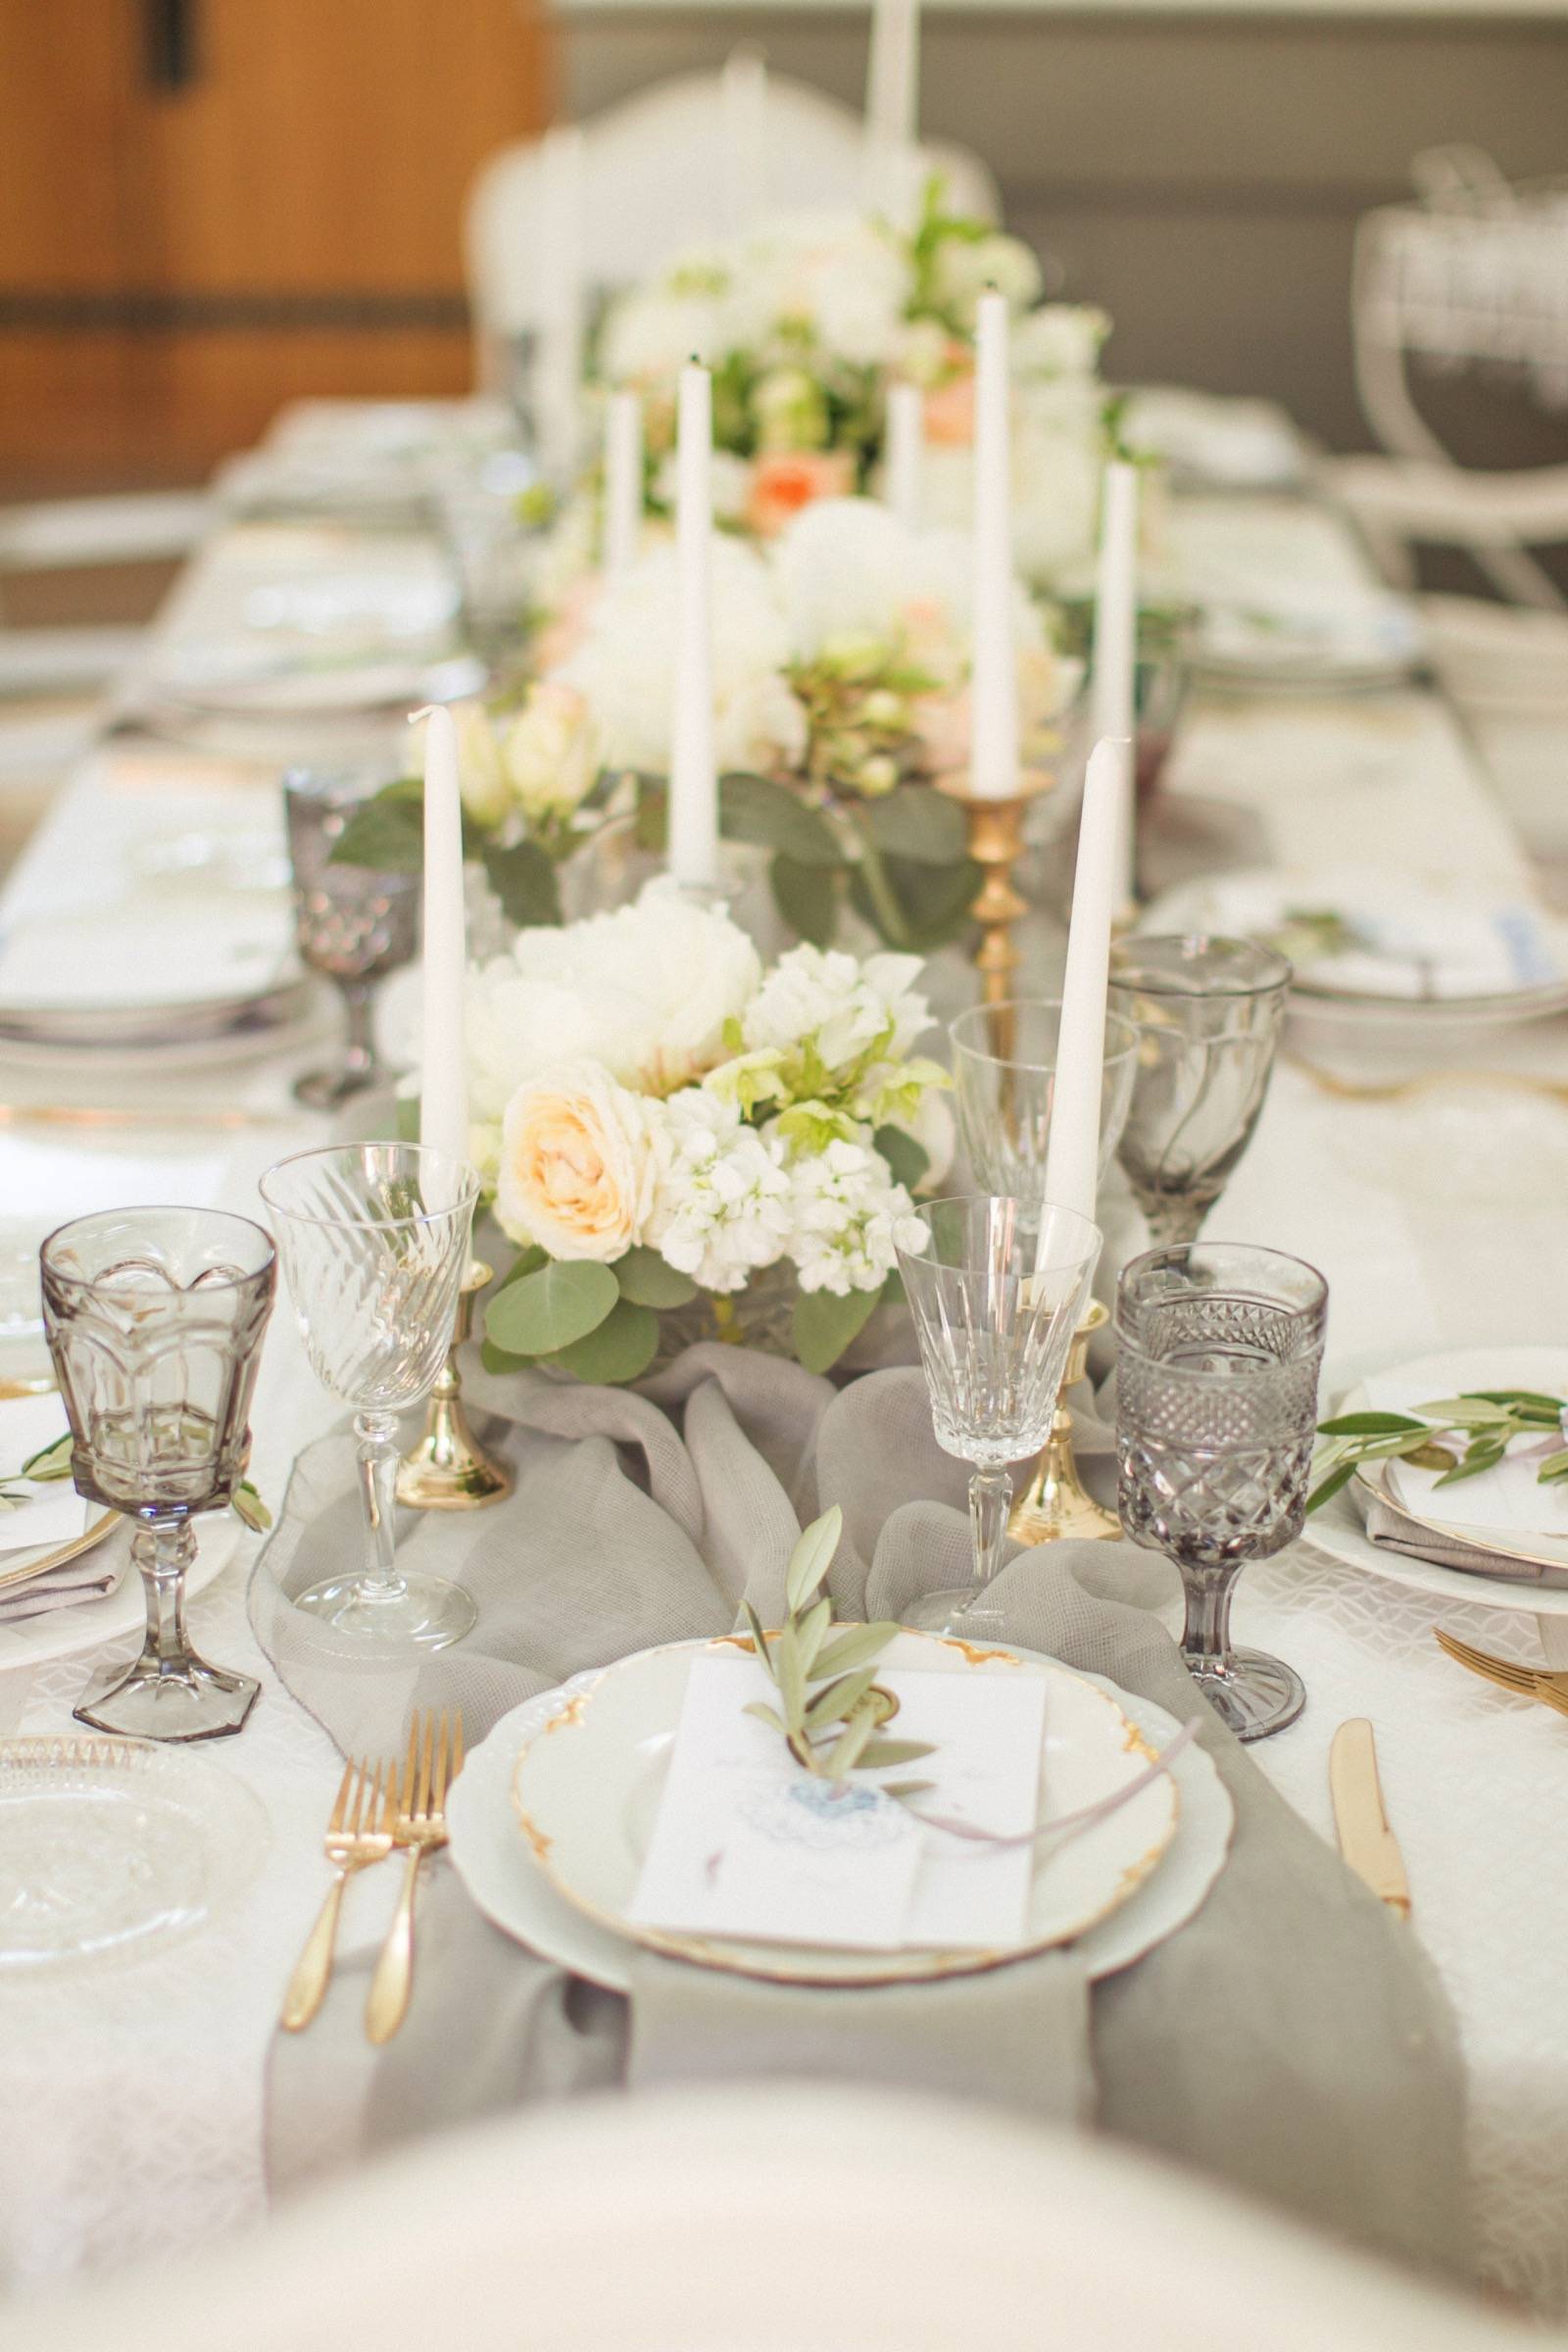 Intimate Private Estate Wedding & Dinner Party